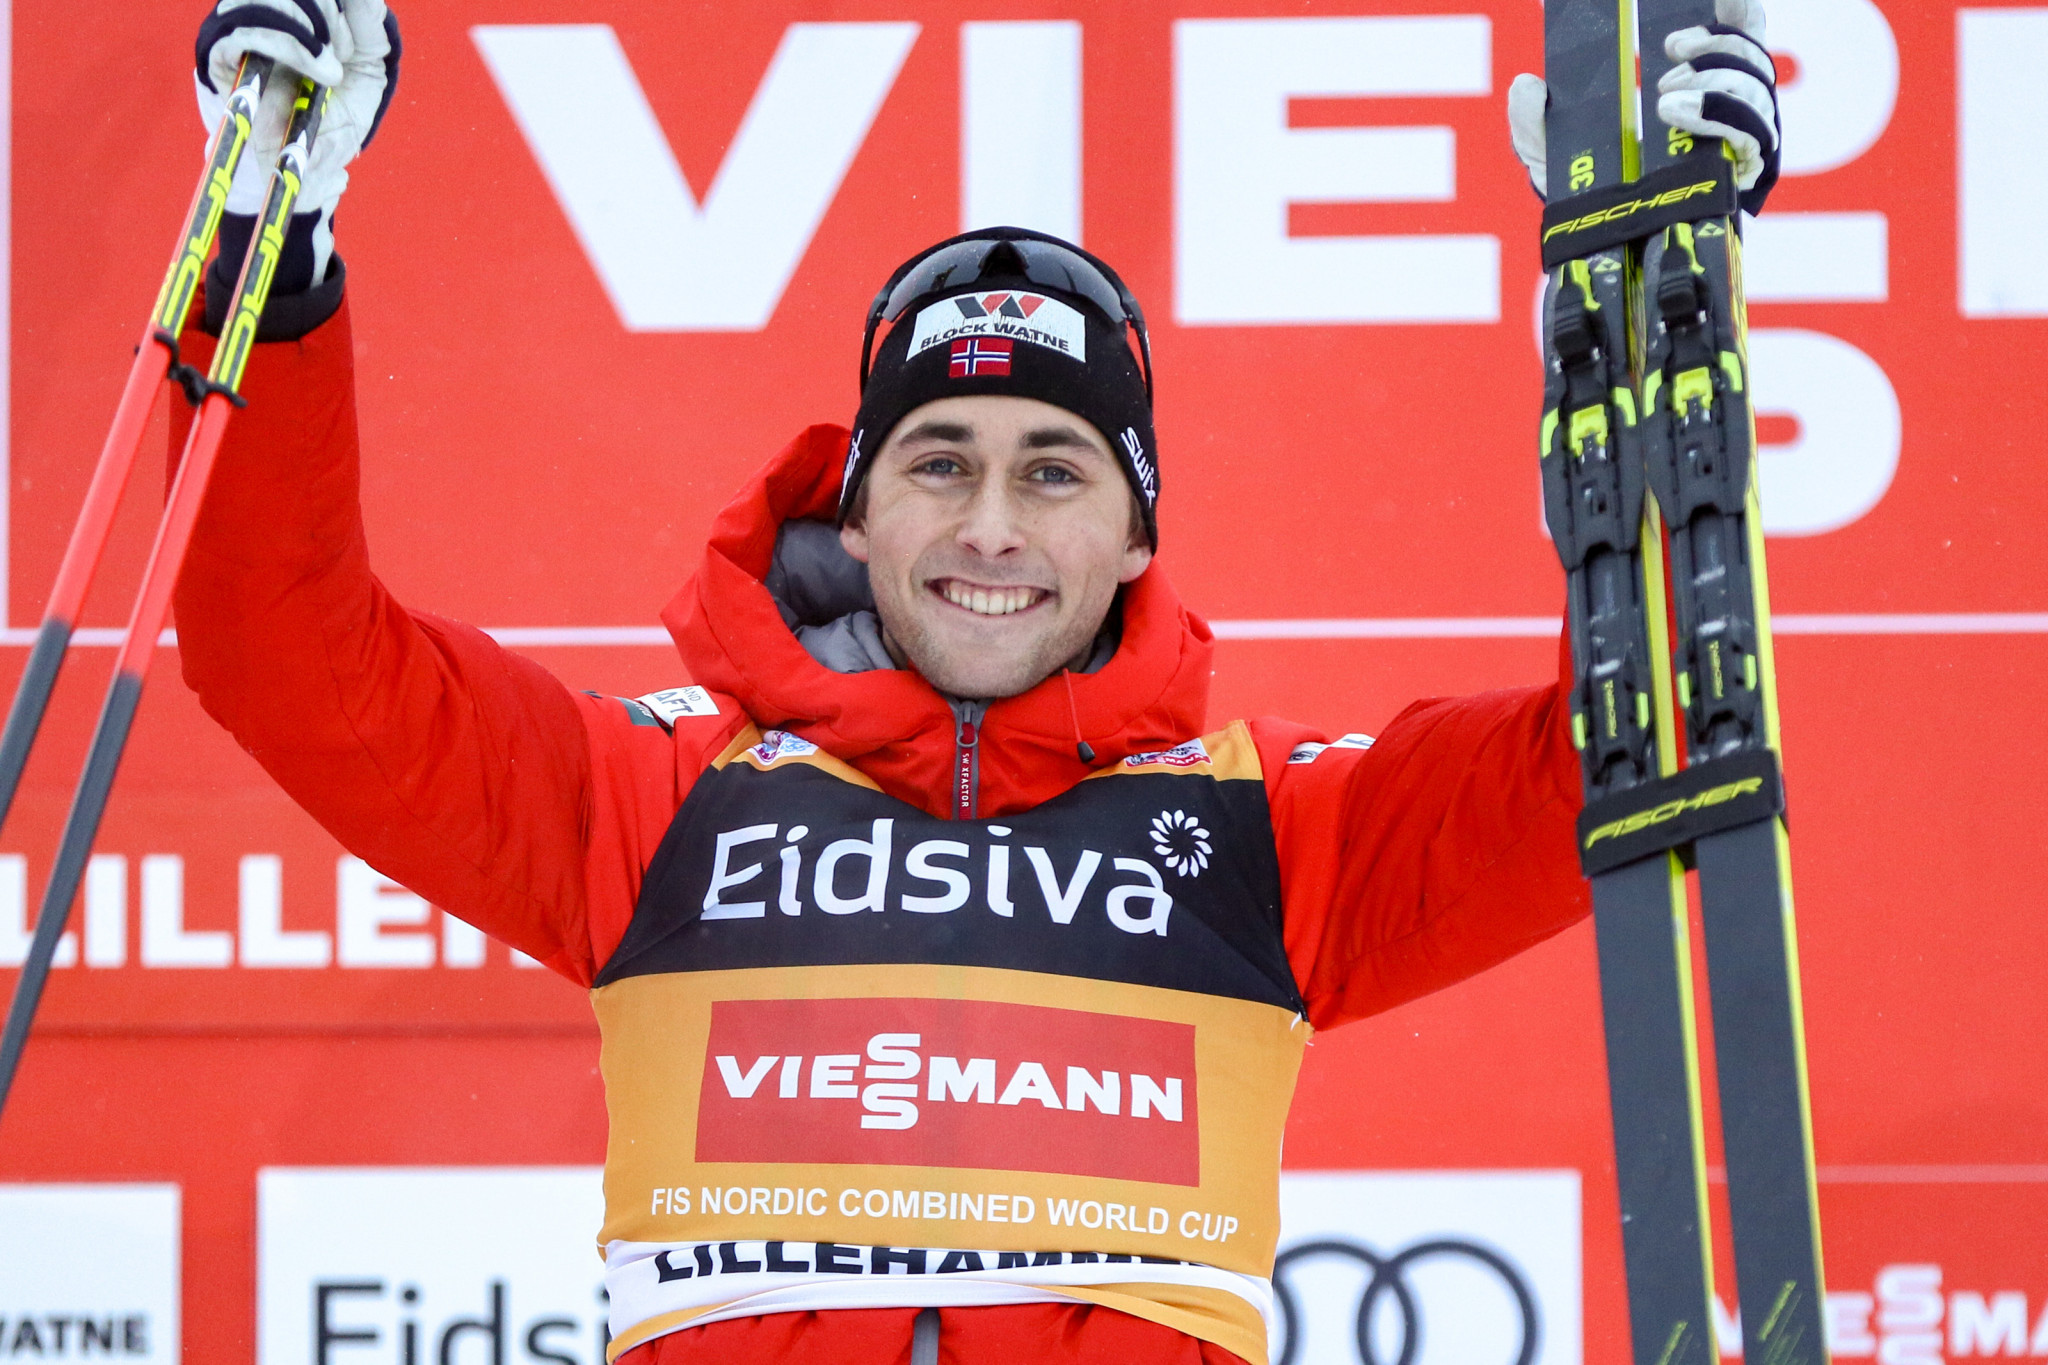 Norway's Jarl Magnus Riiber continued his incredible start to the FIS Nordic Combined World Cup season today ©Getty Images